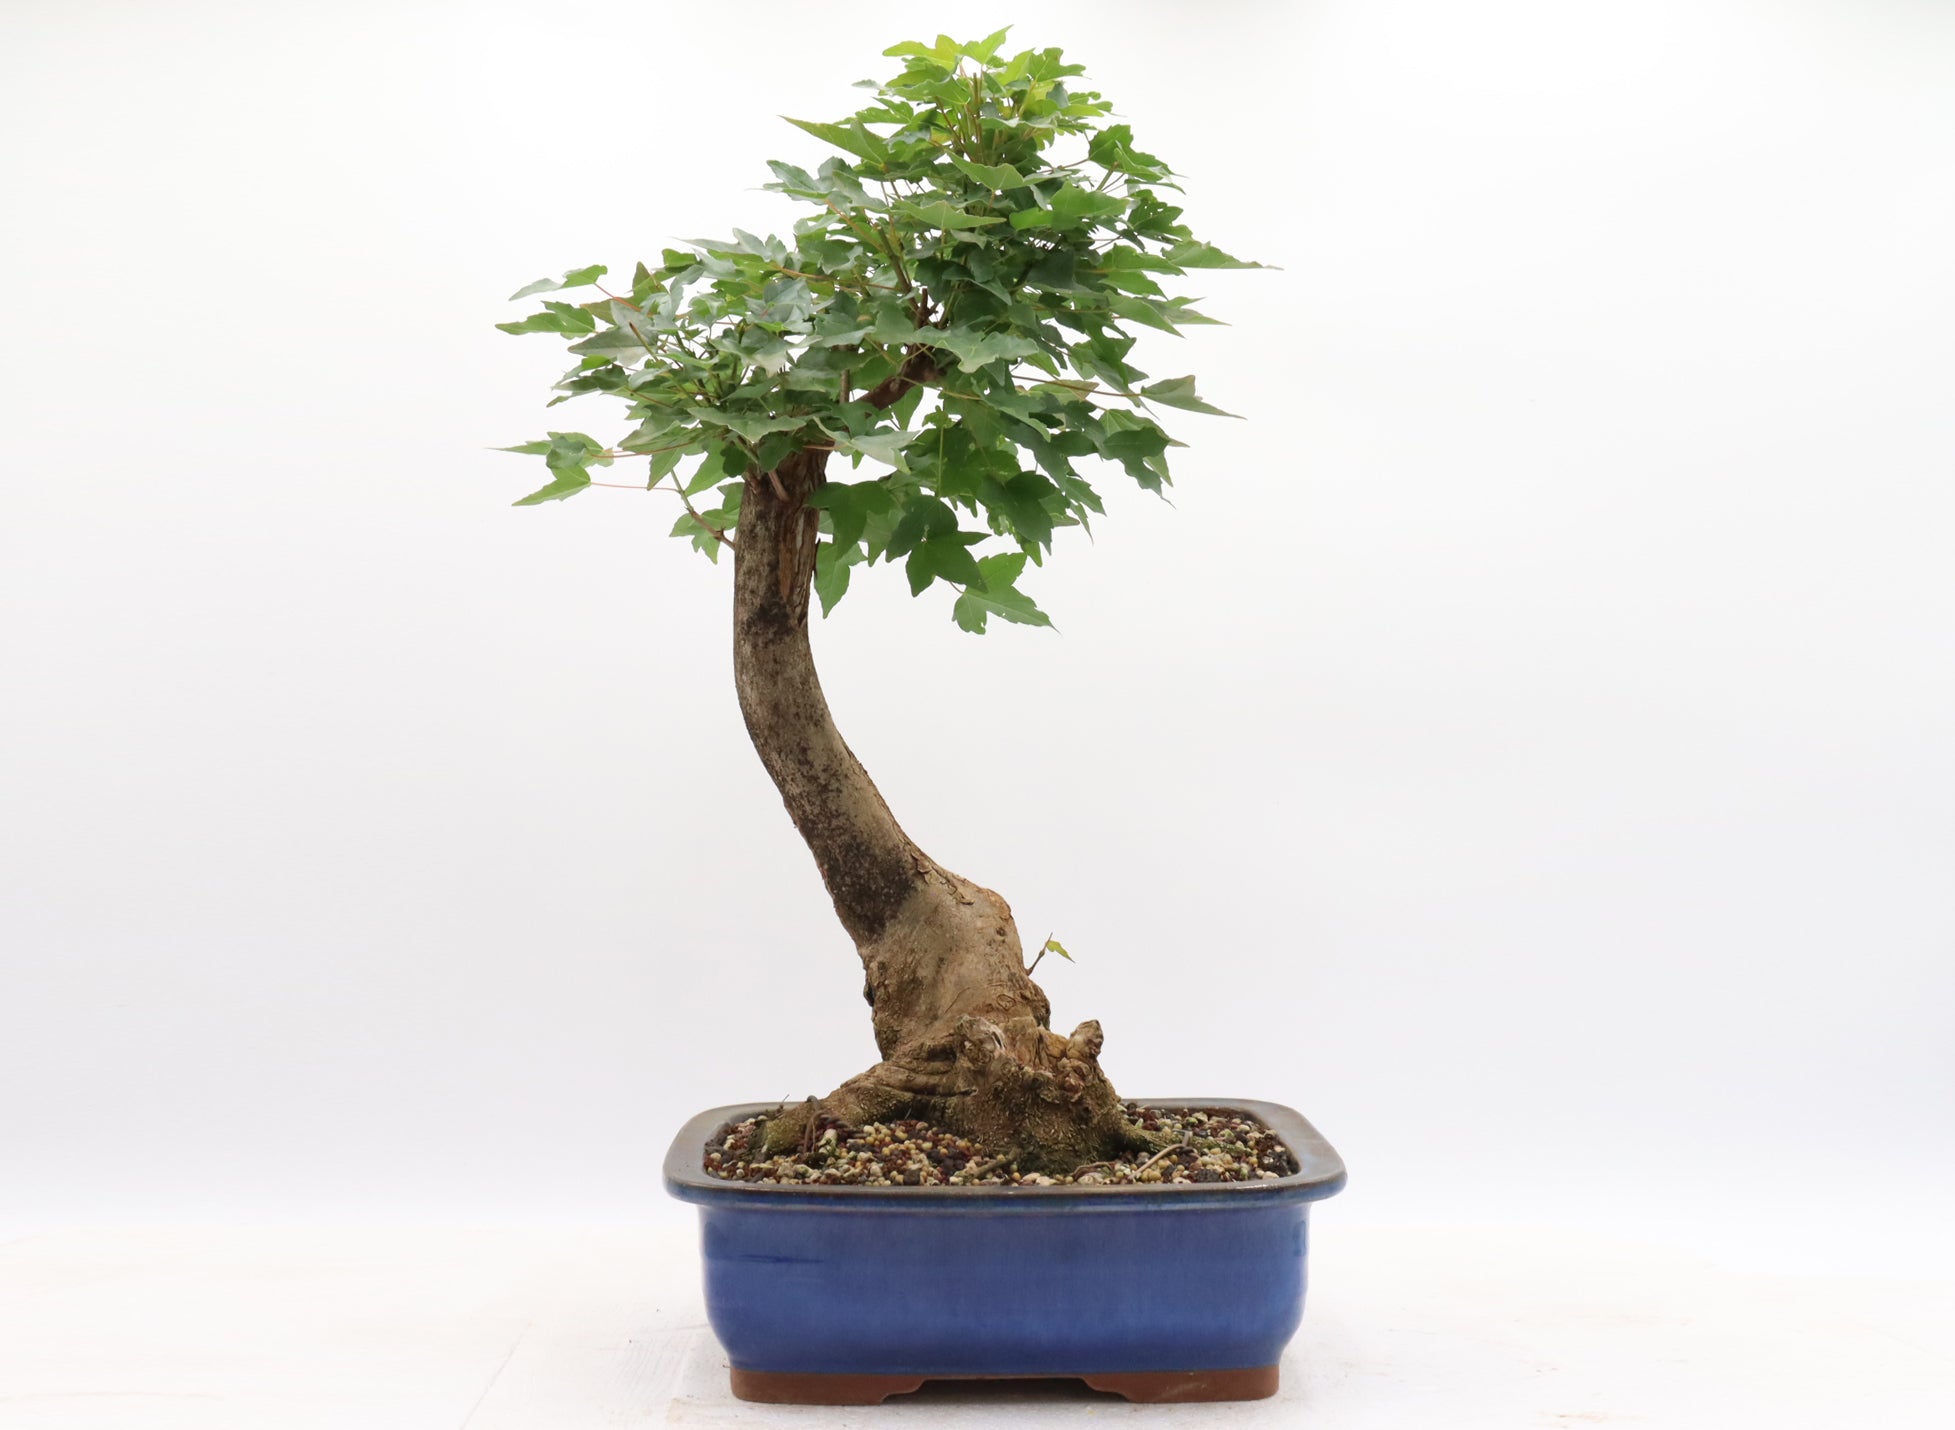 Trident Maple in a Blue Glazed Container